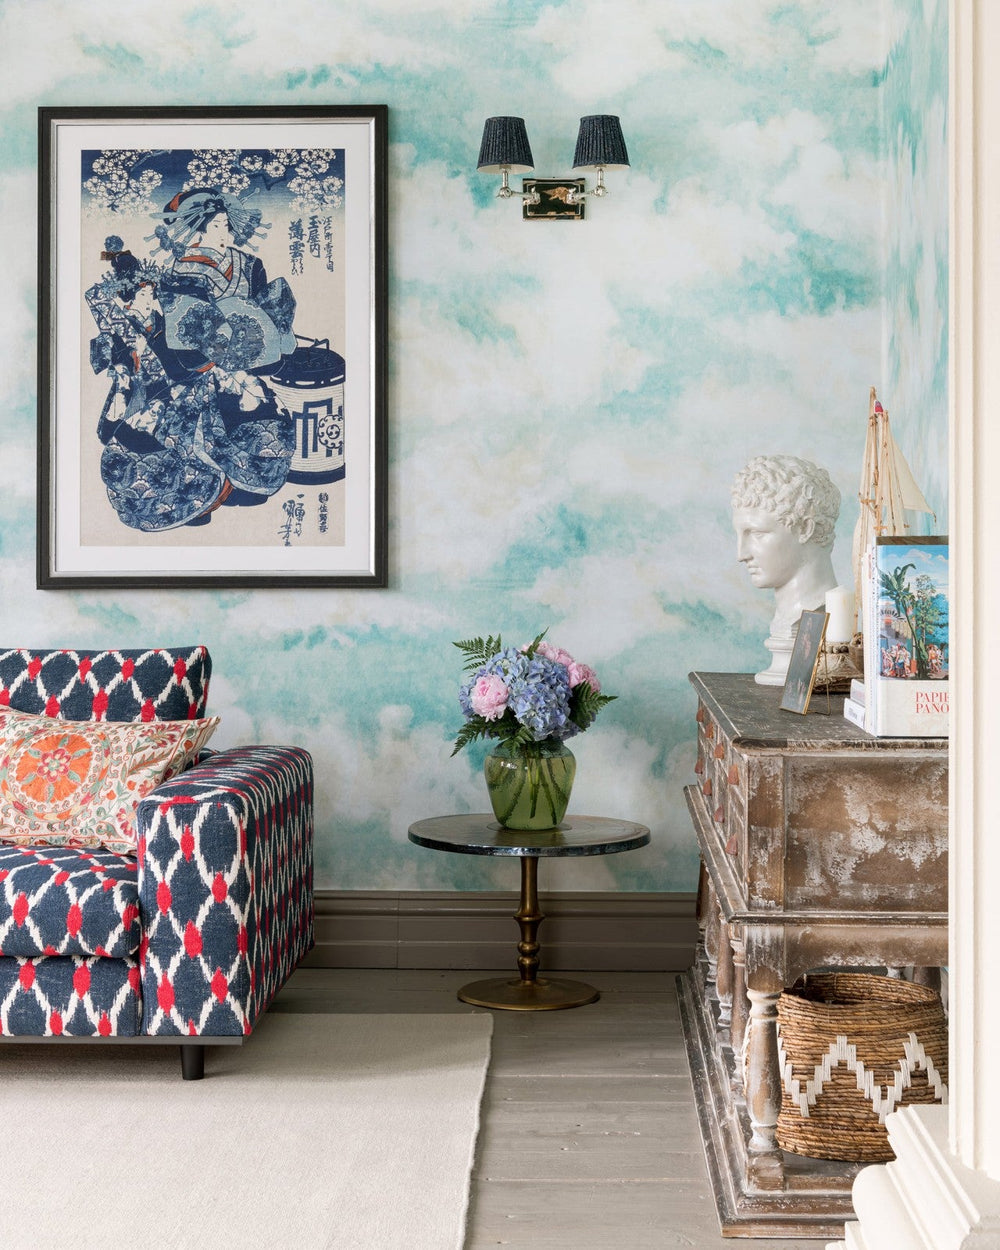 Mind-the-Gap-orient-express-collection-nouage-dreamlike-cloudy-sky-wallpaper-tranquil-dreamy-fluffy-cloud-ceiling-floating-turquoise-WP20789